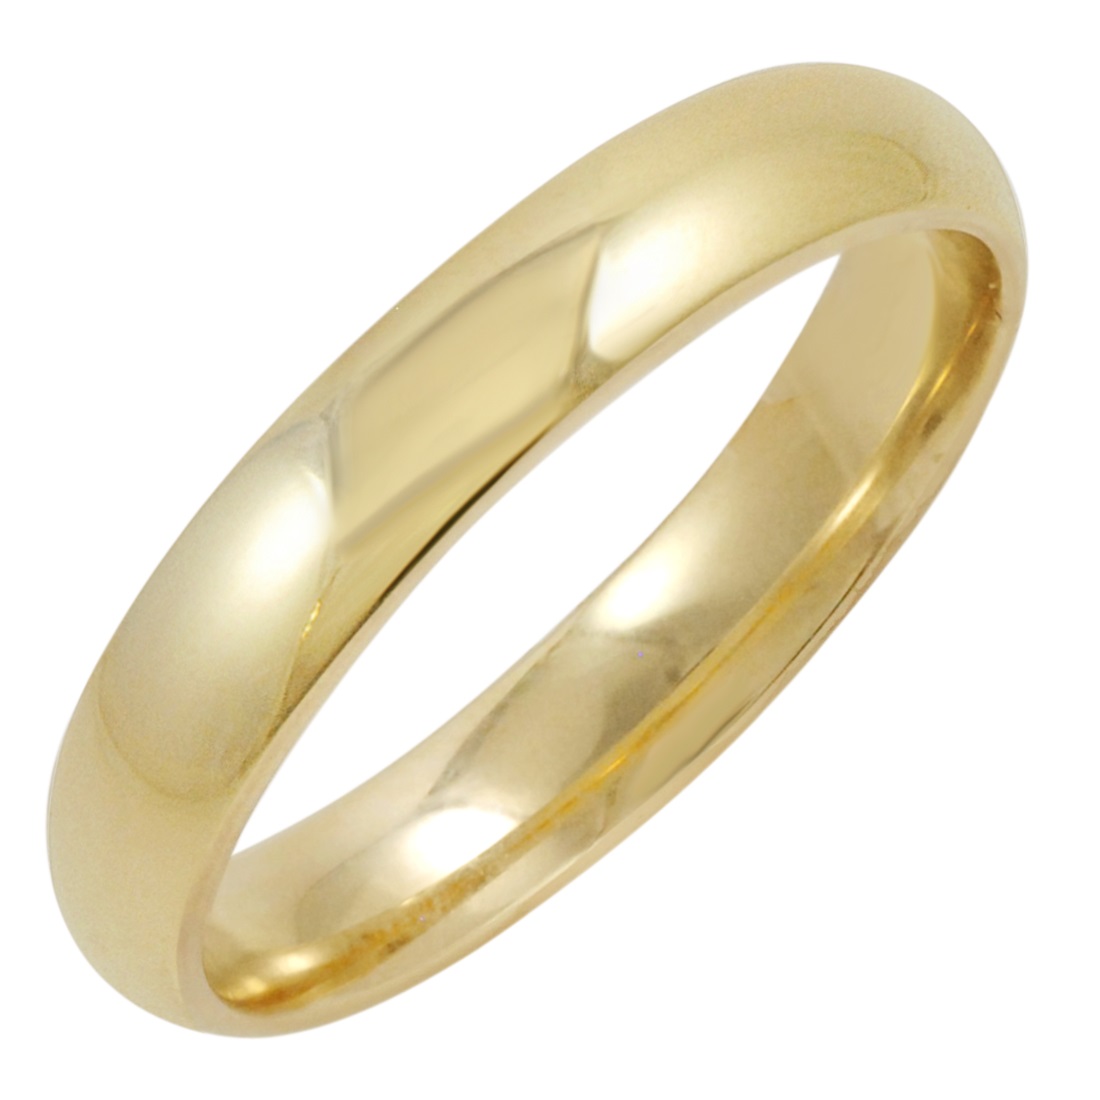 Oxford Ivy Men's 10K Yellow or White Gold 4MM Comfort Fit Plain Wedding Band Choose your Ring Size